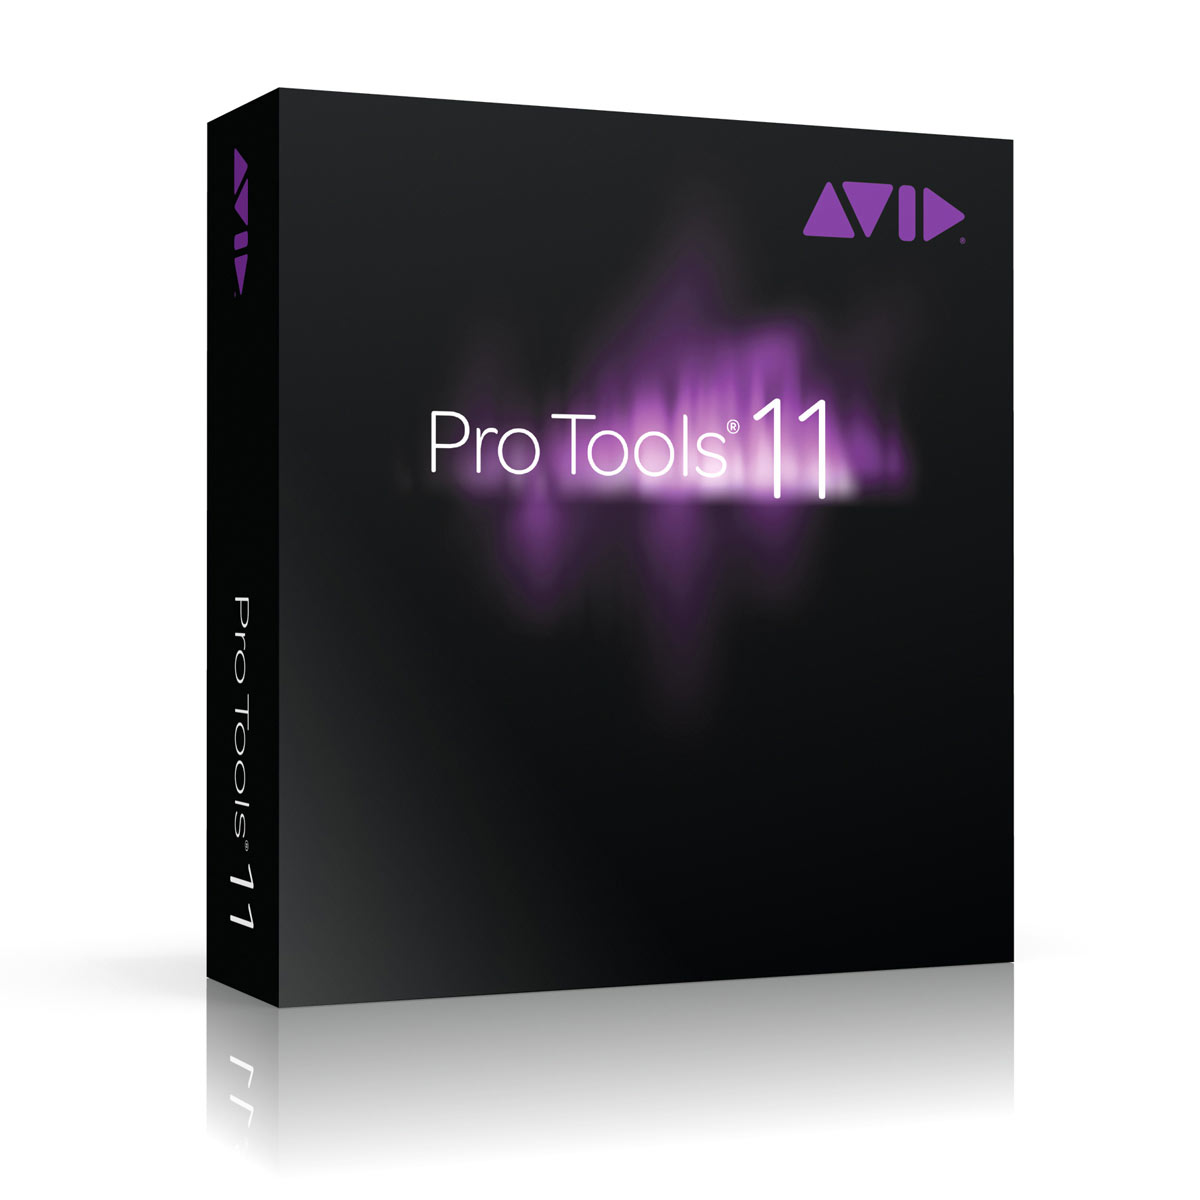 AVID PRO TOOLS 11 (W/DVDS) - Without Standard Support